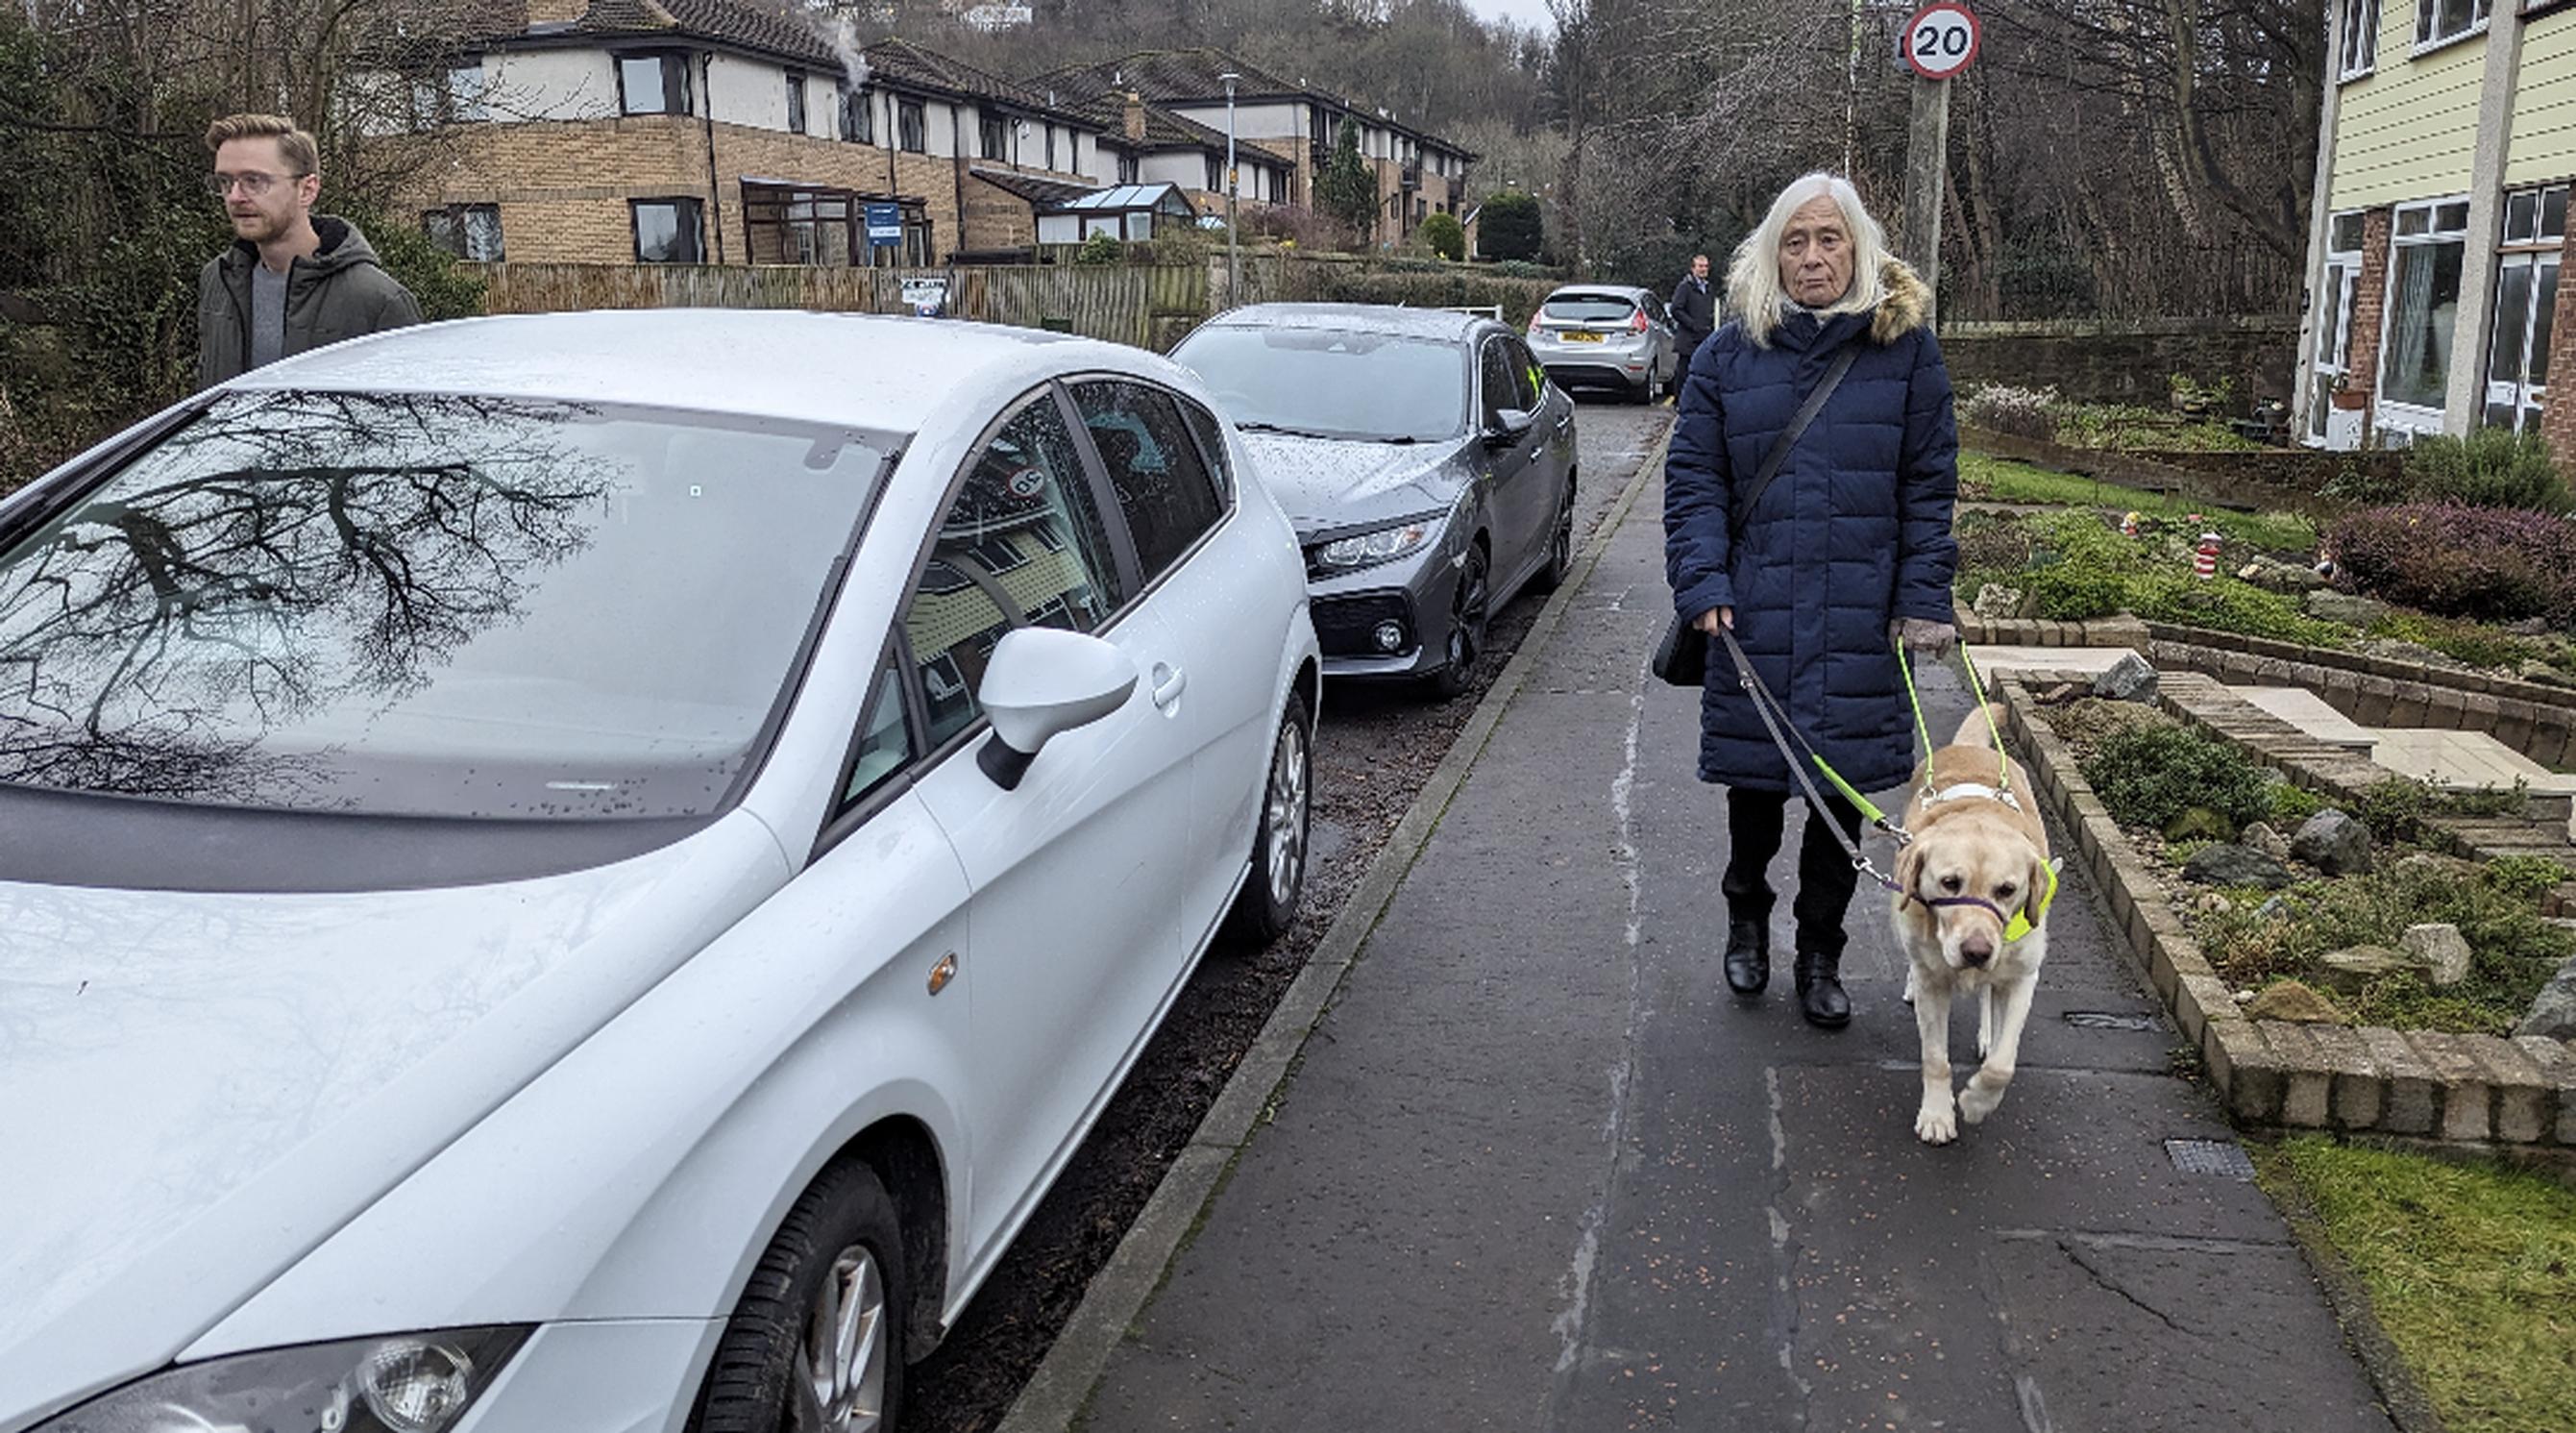 Pavement parking ban has been welcomed by guide dog owners